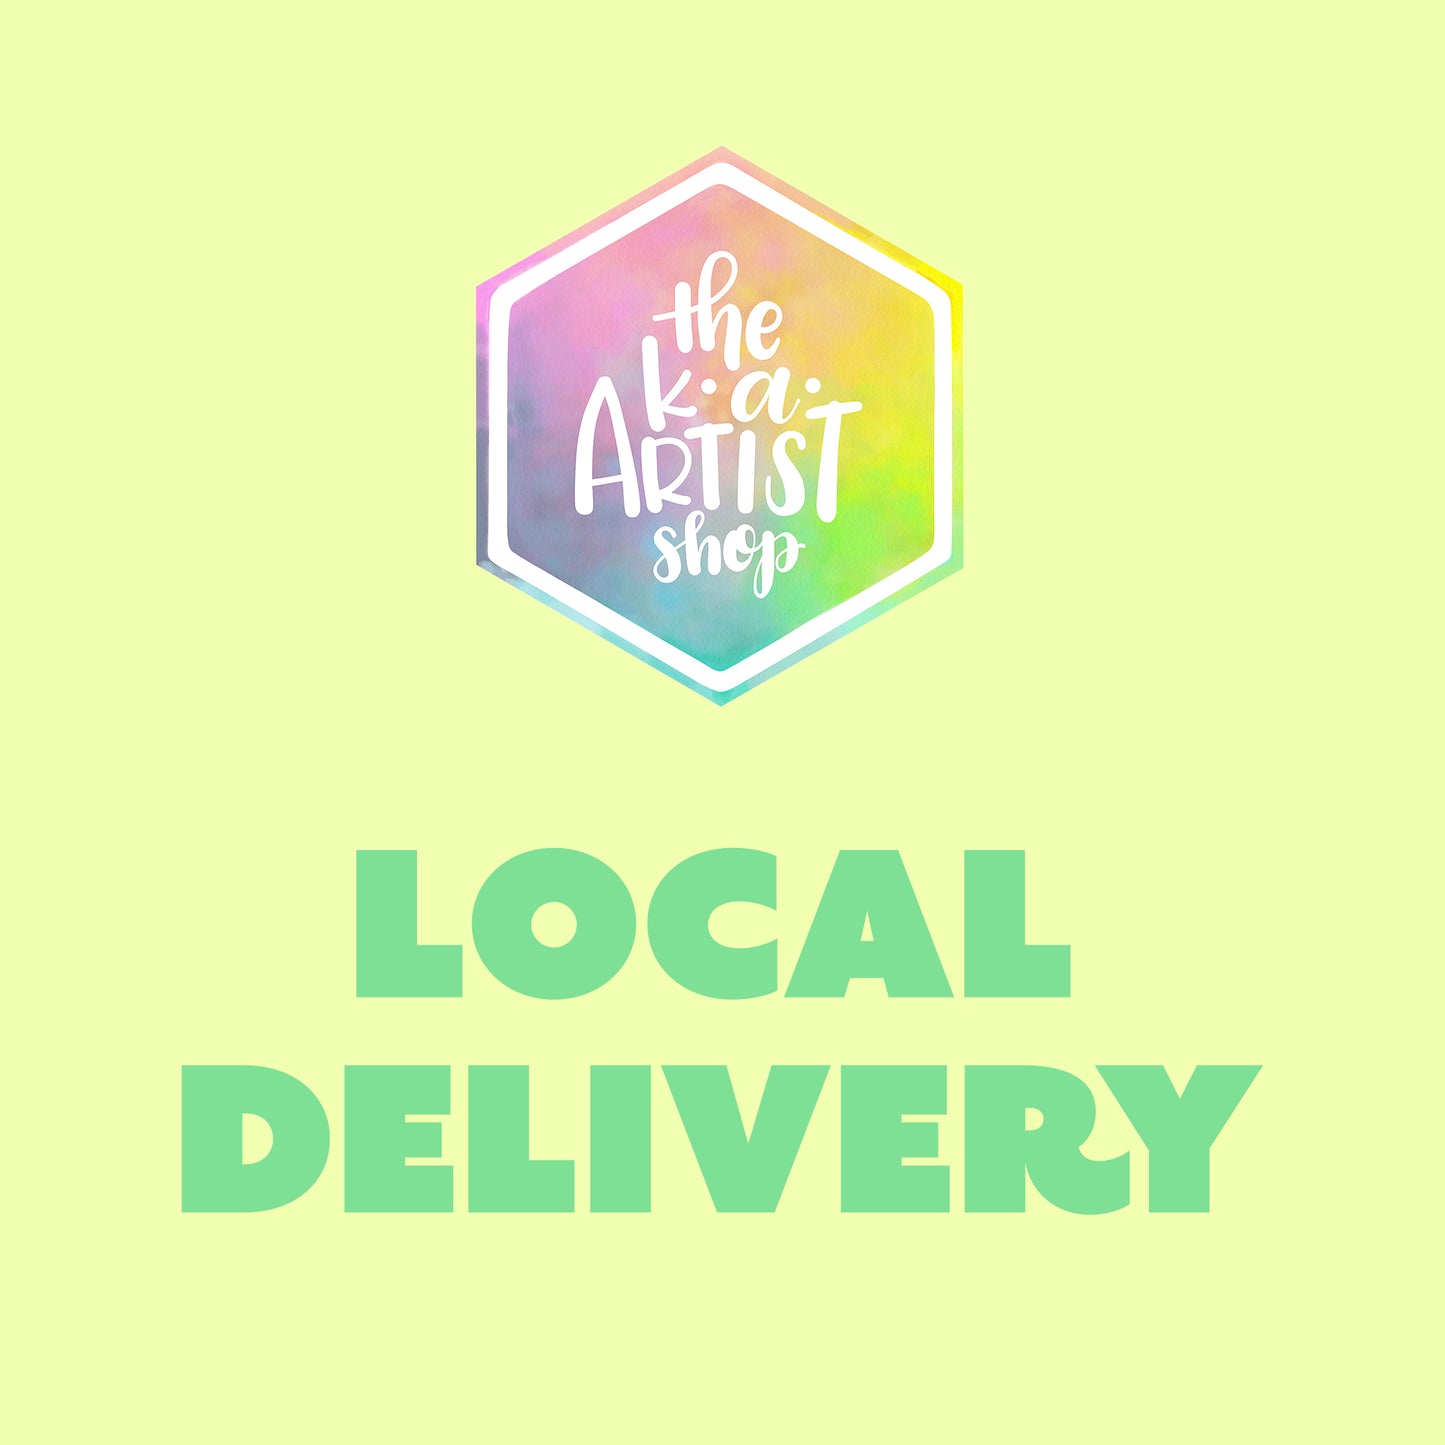 Local Delivery (for addresses within 5 miles of shop) - by K. A. Artist Shop - K. A. Artist Shop